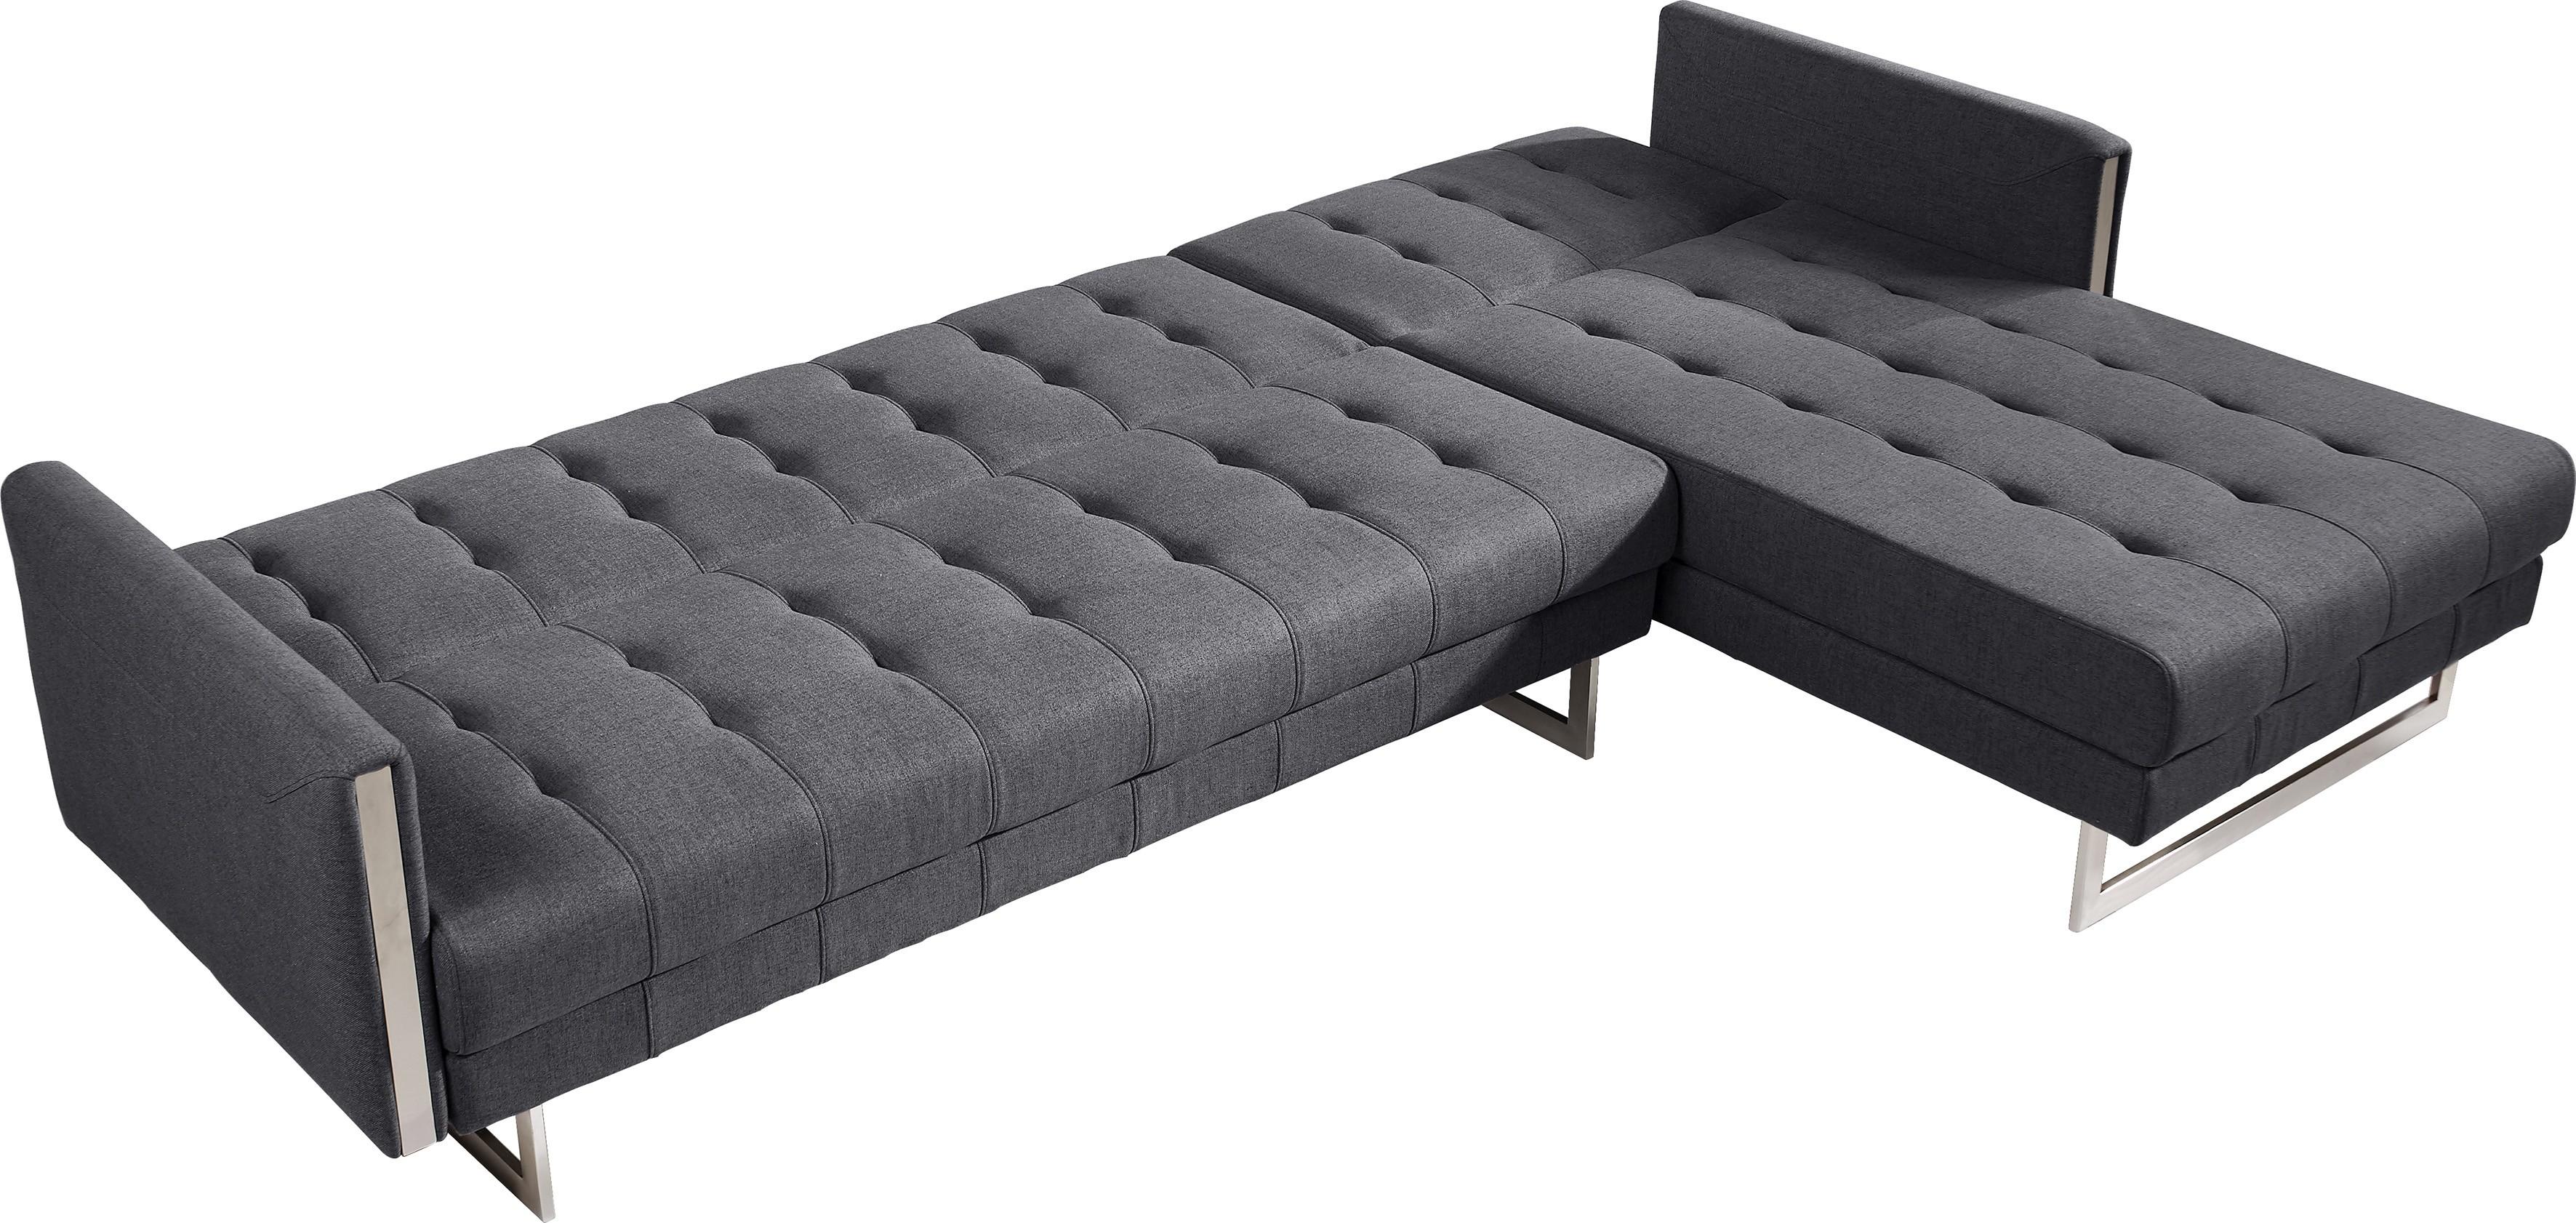 

    
At Home USA Andrea Grey Tufted Fabric Sectional Sofa Bed Contemporary Modern
